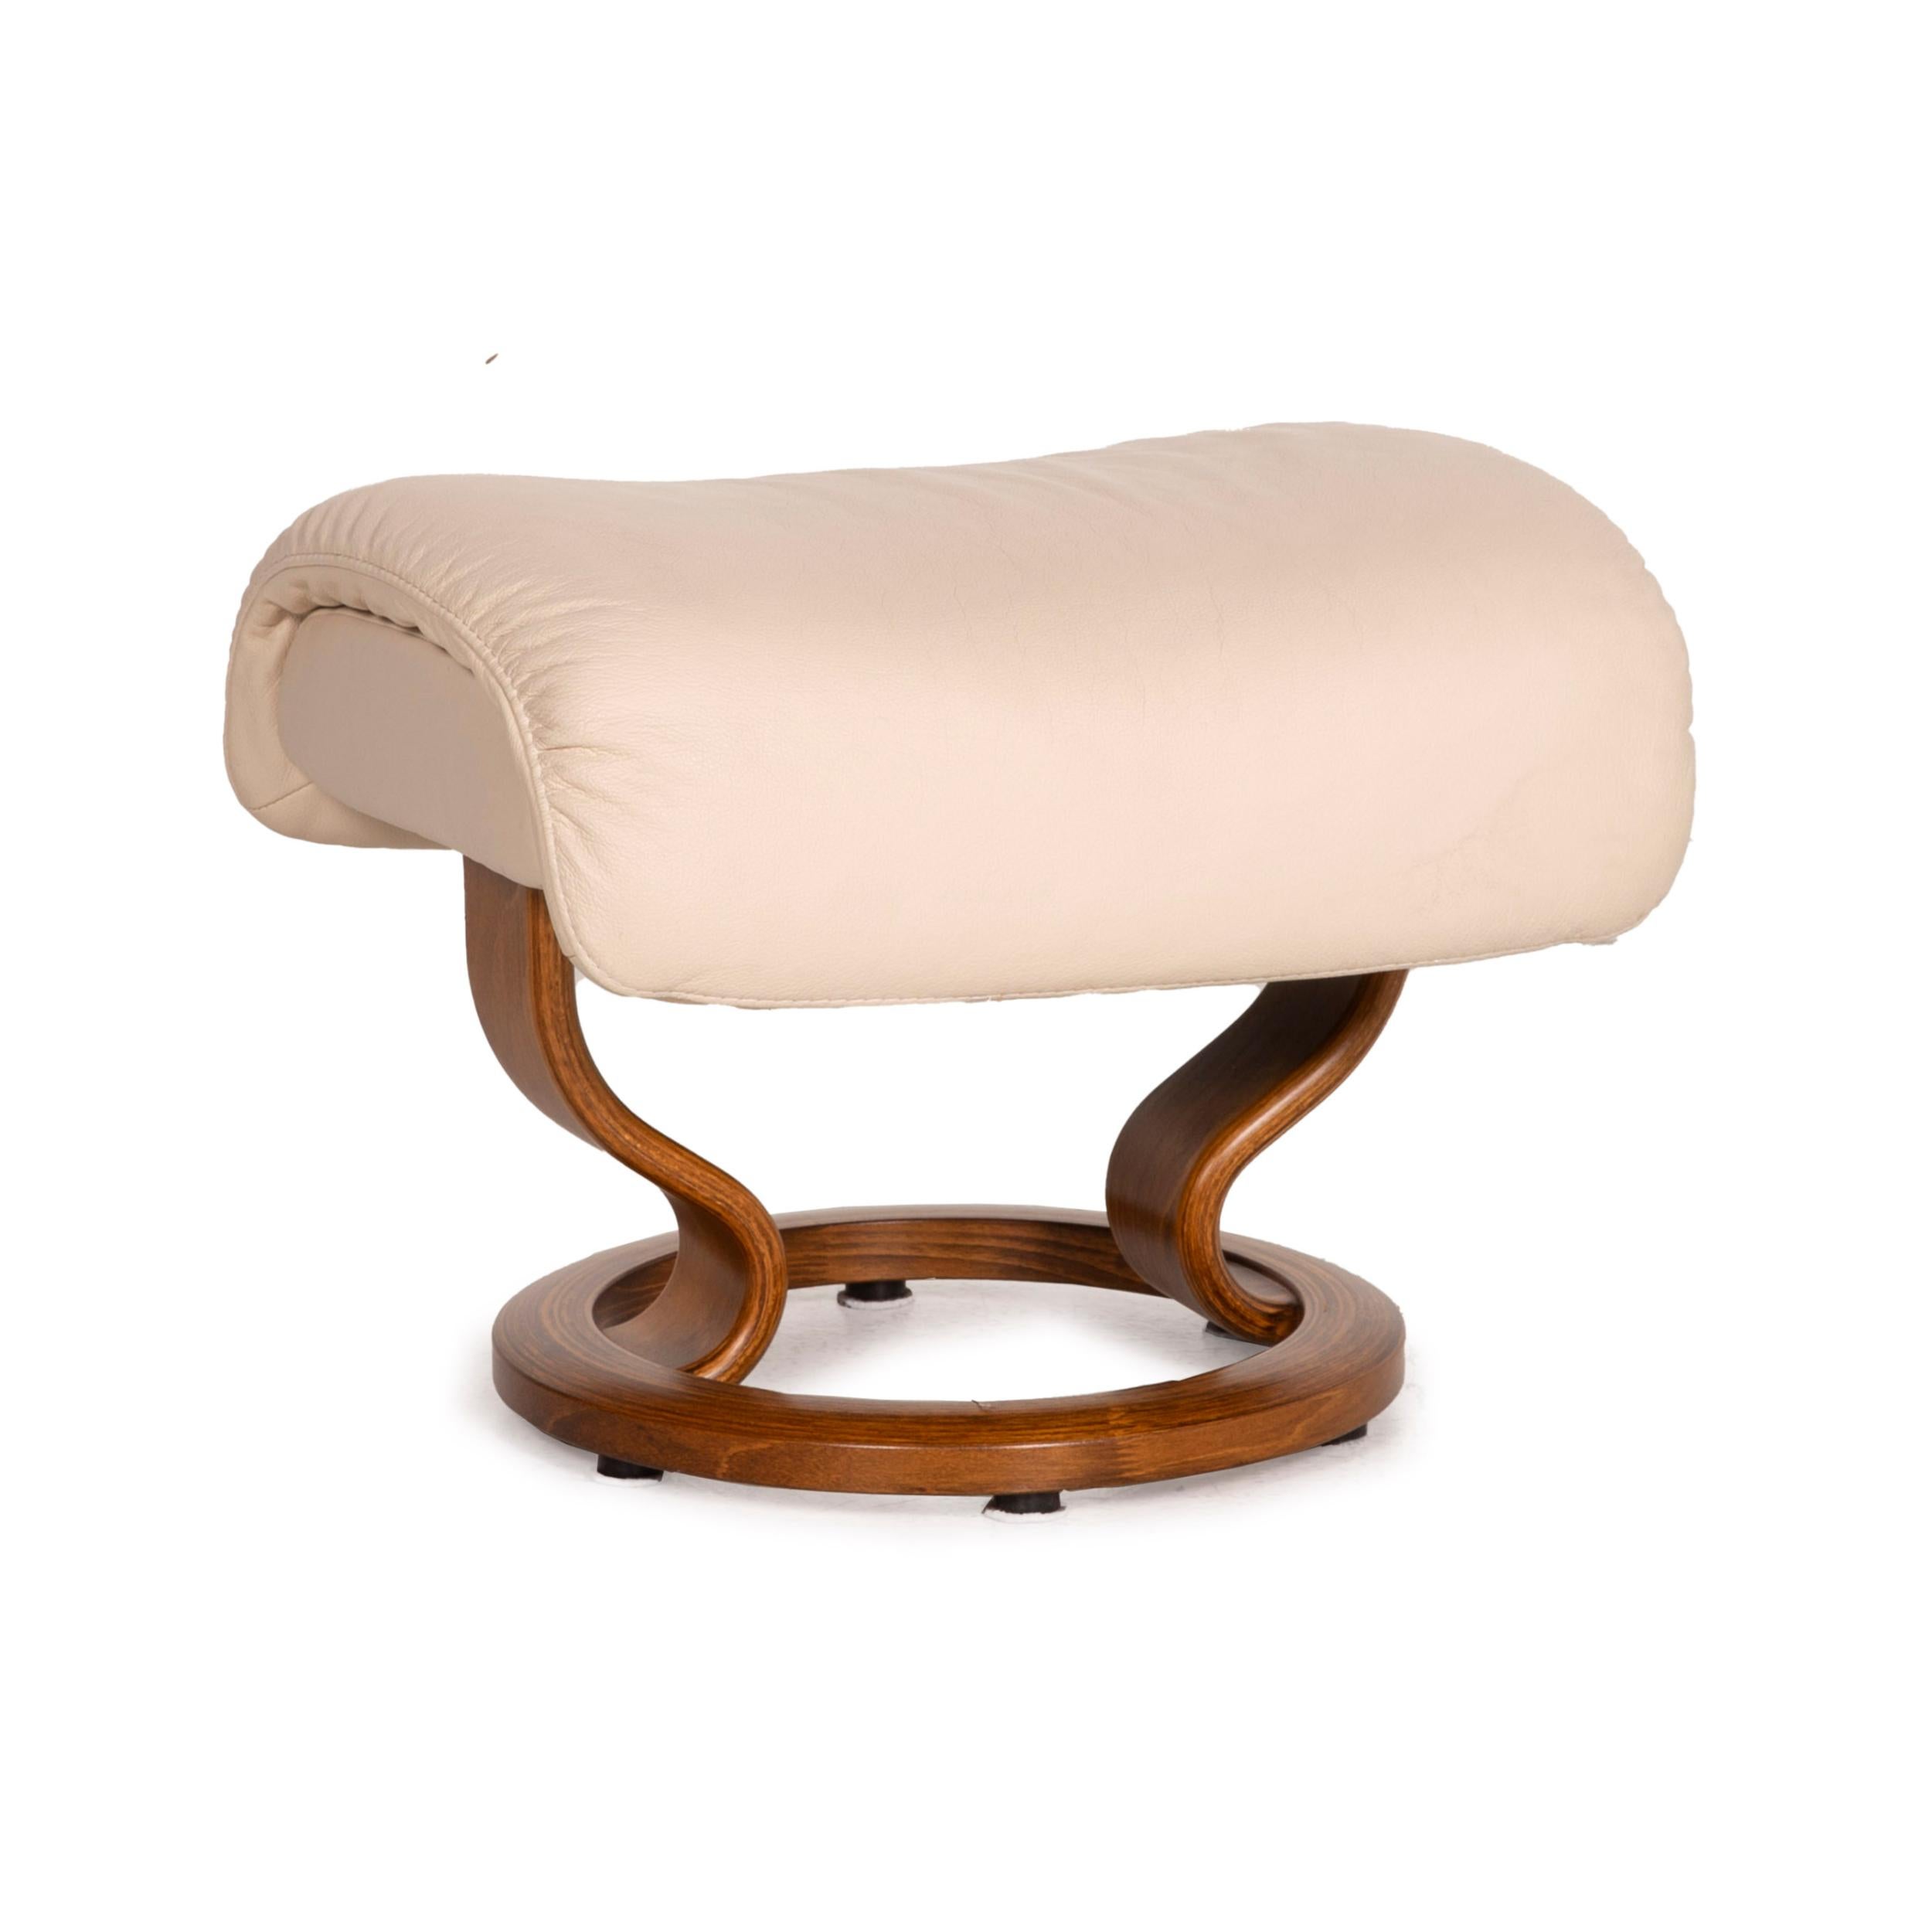 Stressless Vision Leather Armchair Cream Incl. Stool Relaxation Function 7